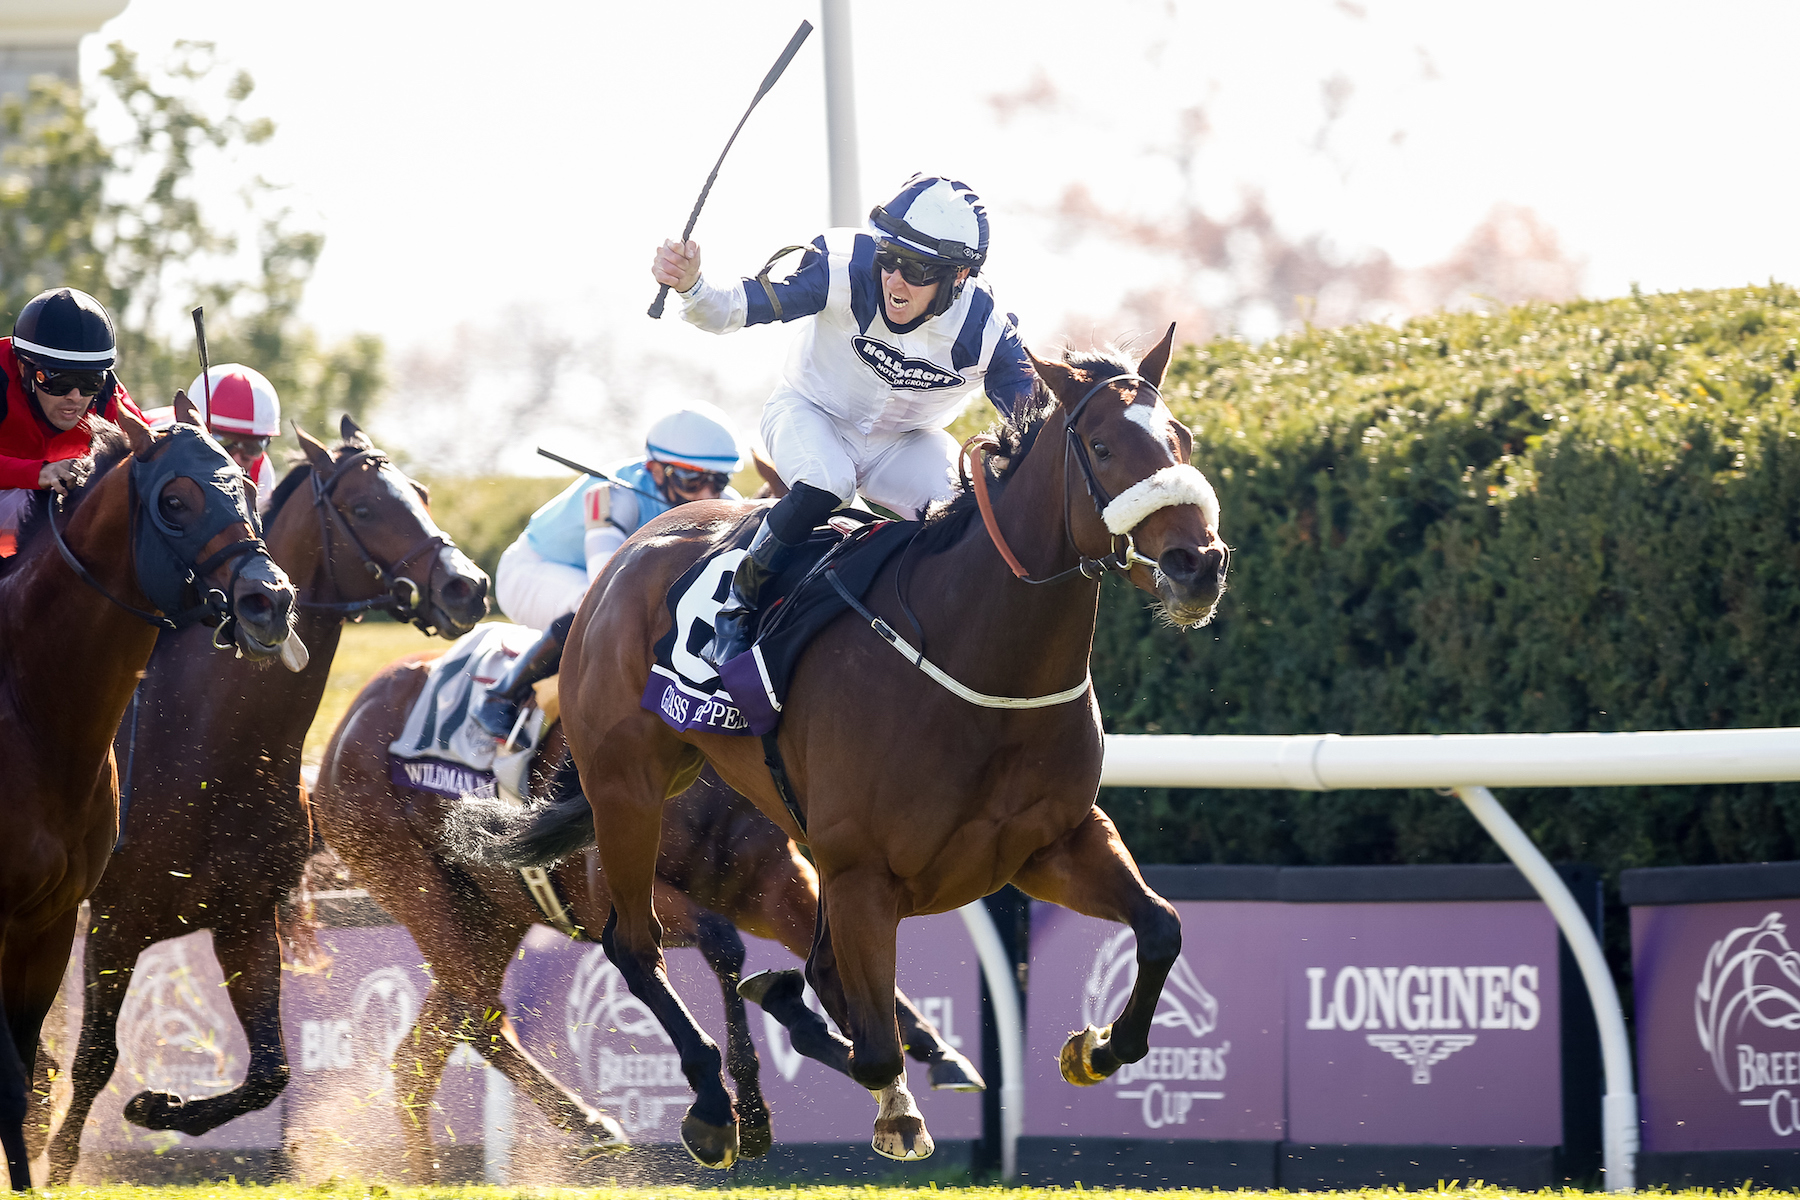 Exhilaration: Glass Slippers and jockey Tom Eaves triumph in the Turf Sprint. Photo: Carolyn Simancik/Breeders’ Cup/Eclipse Sportswire/CSM